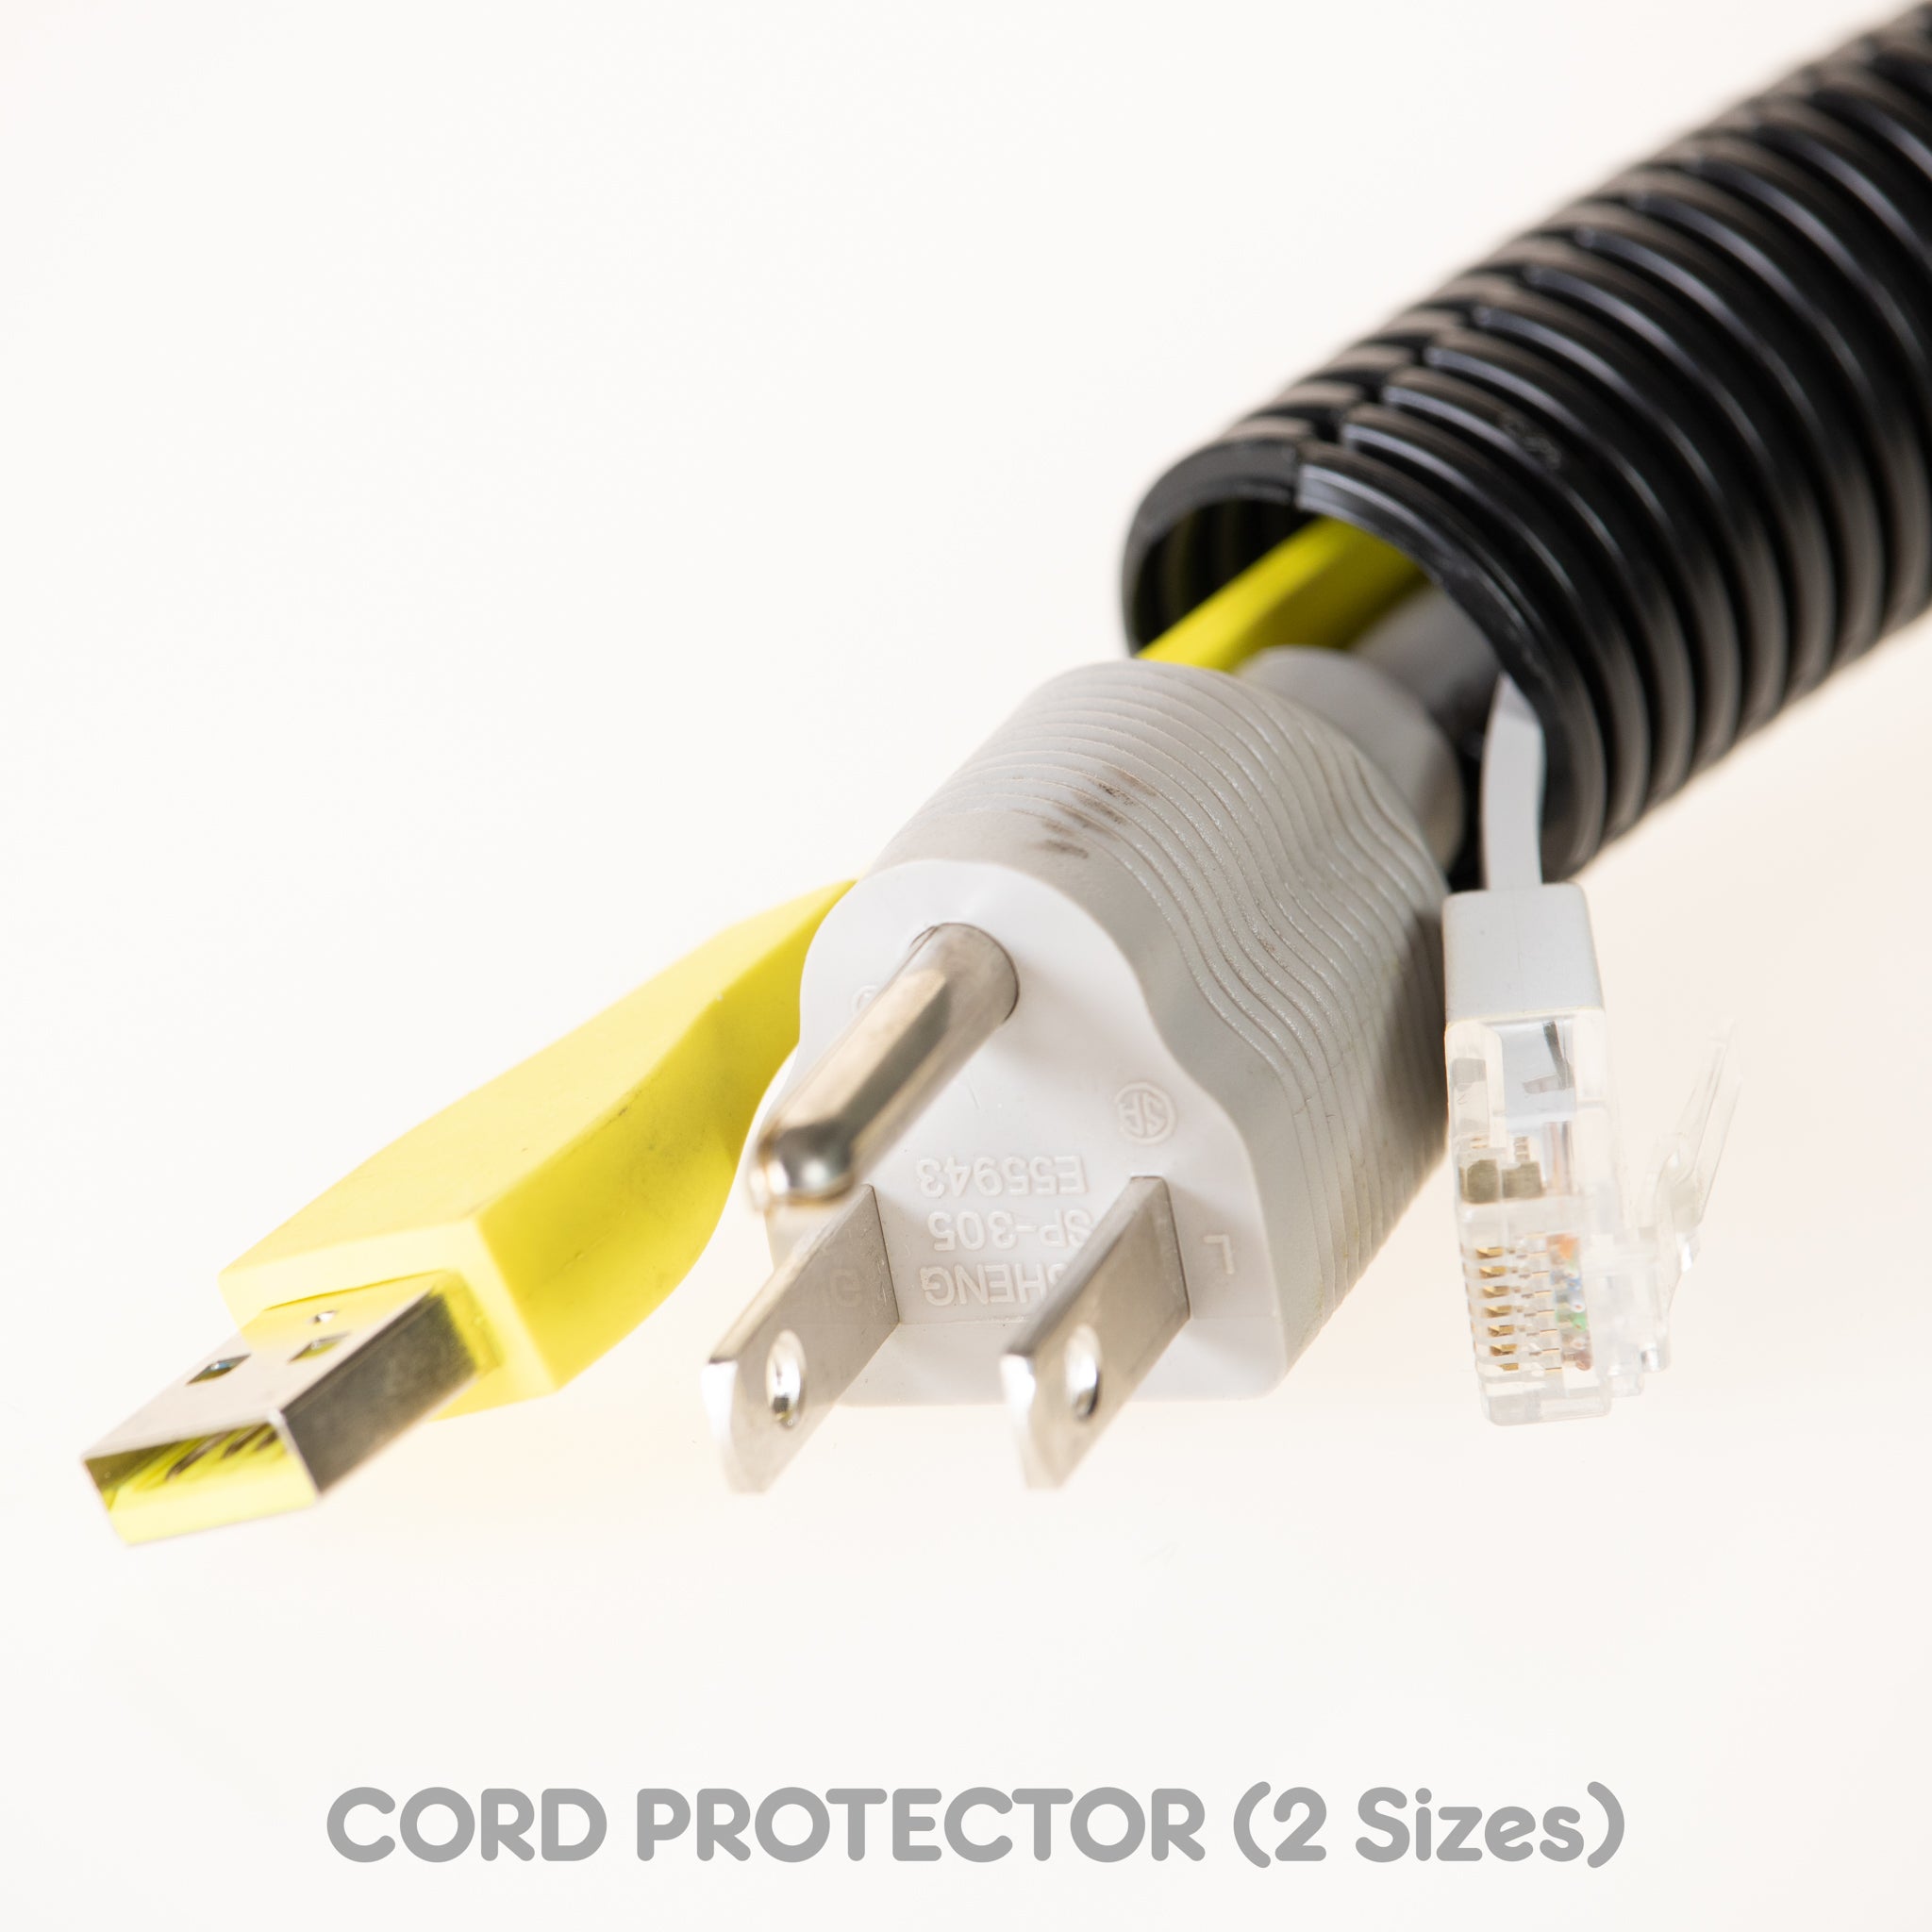 Cable Protectors From Pets